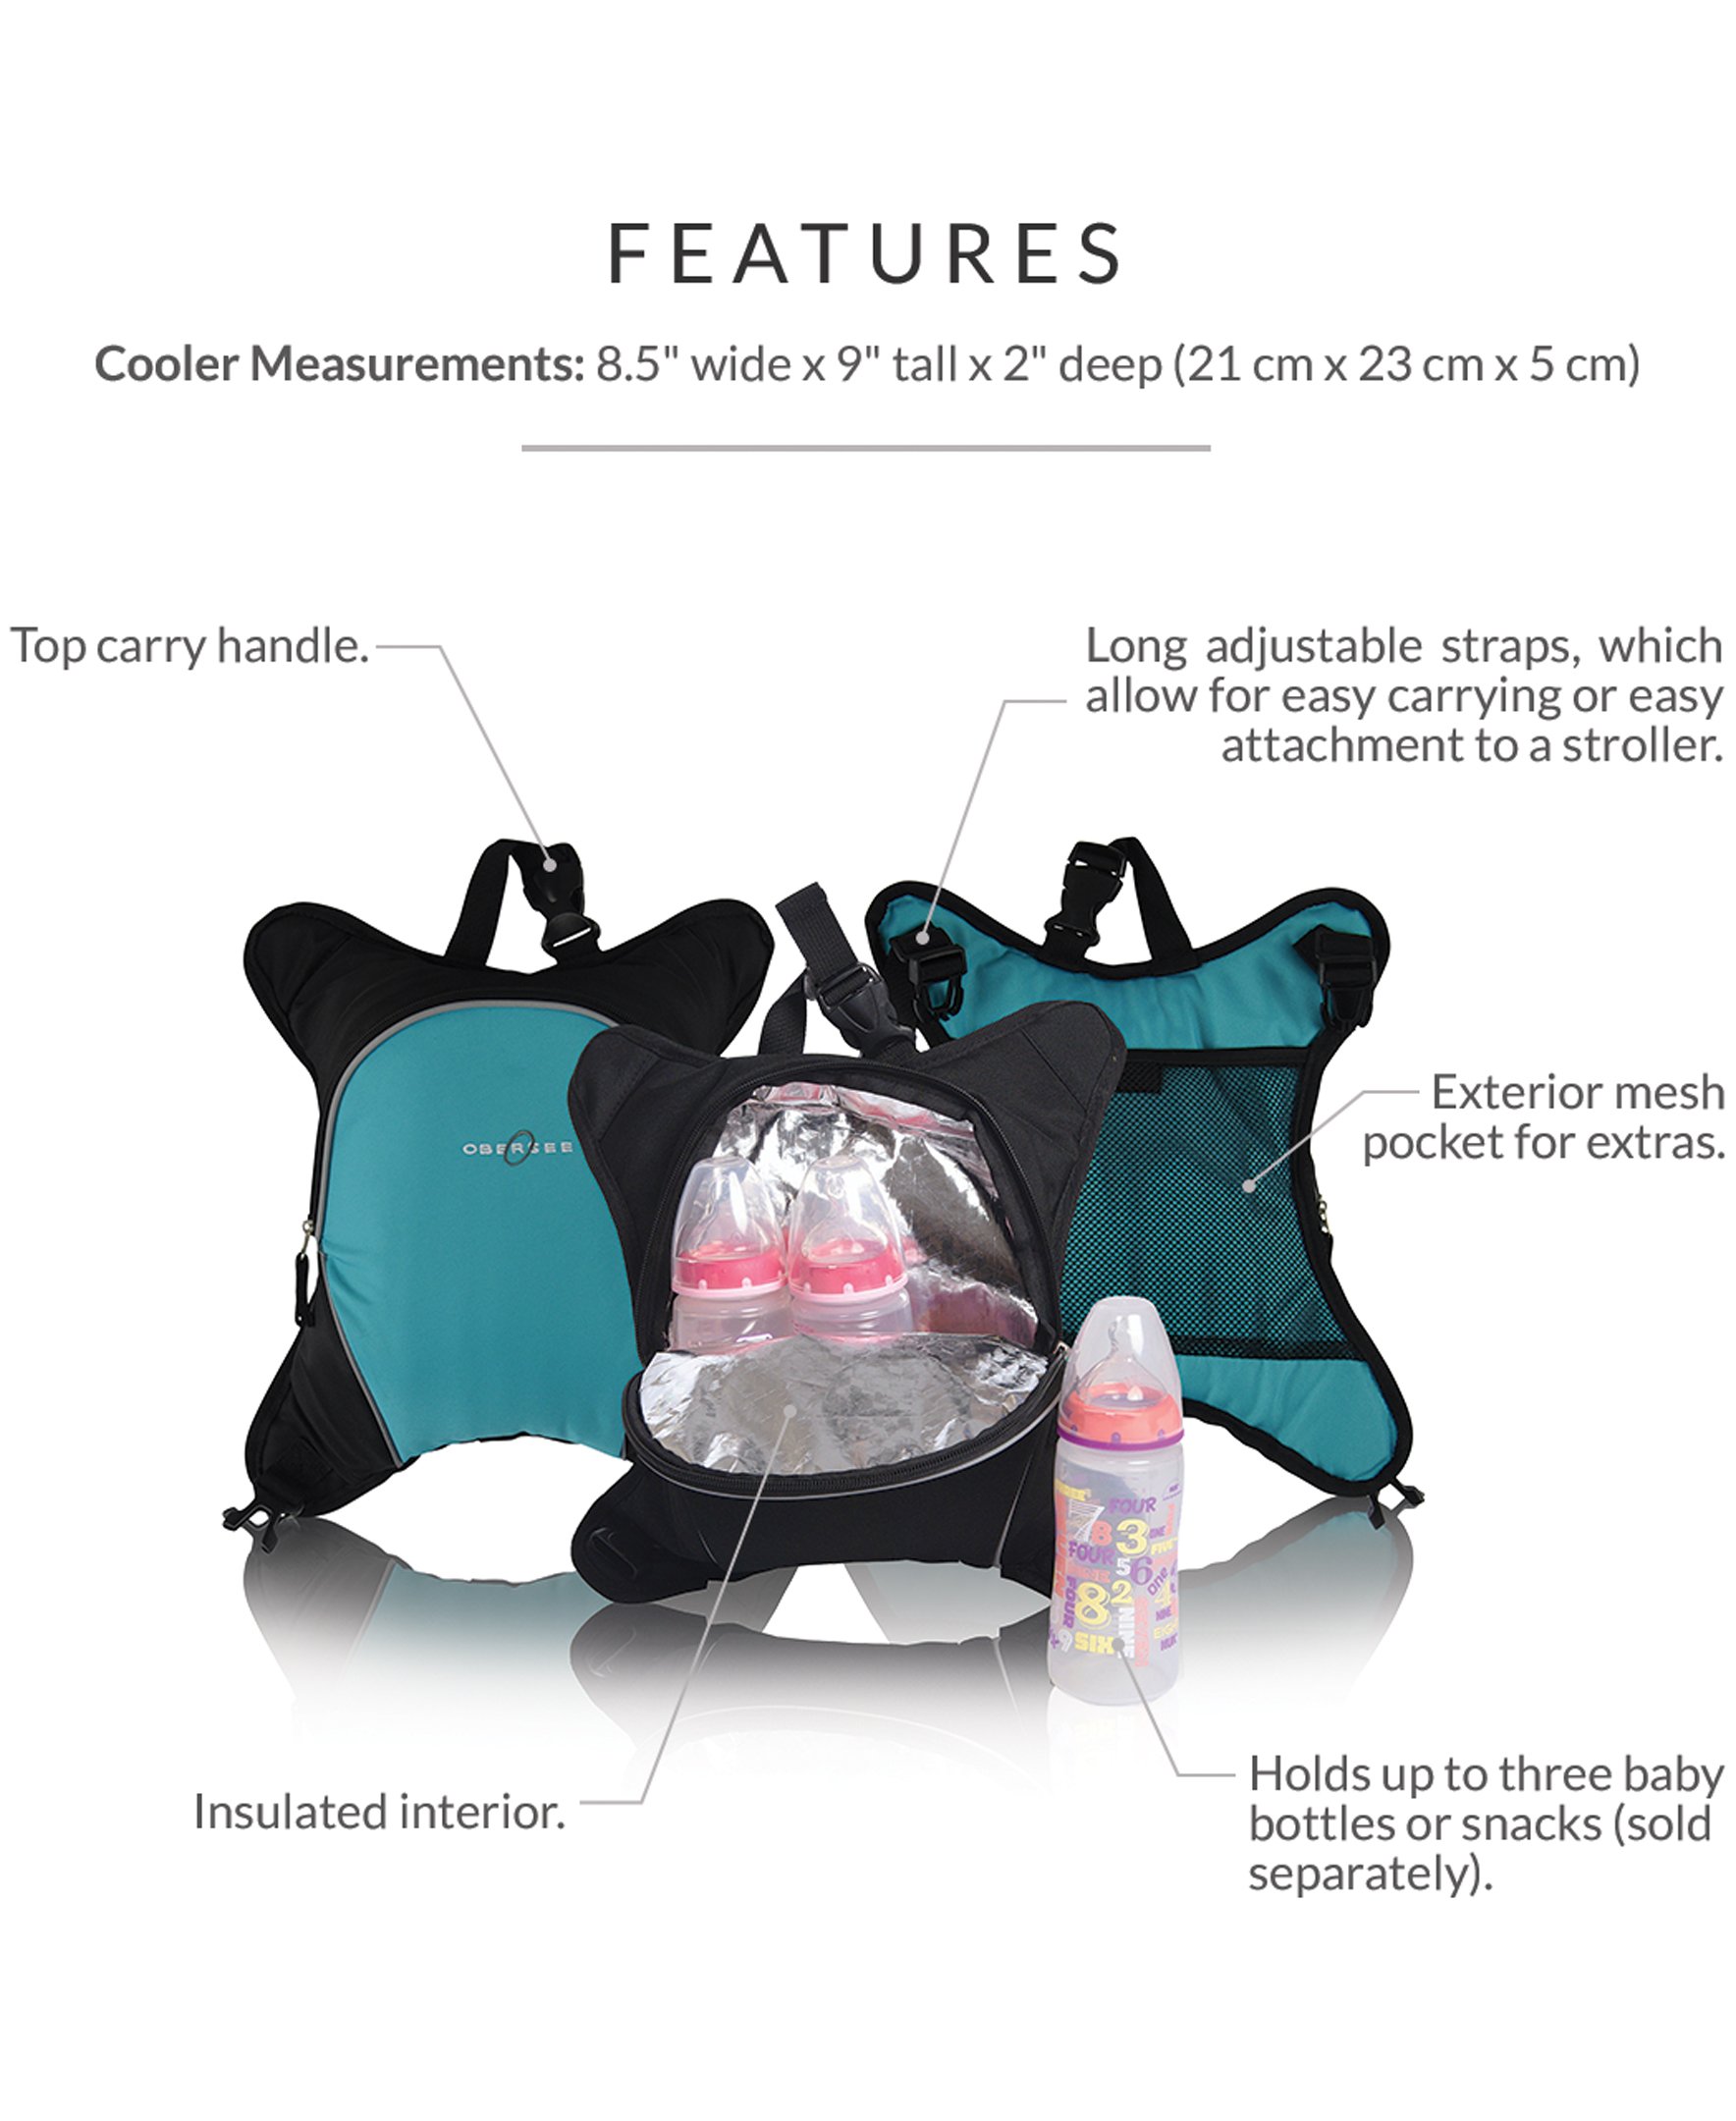 Obersee Oslo Diaper Bag Backpack | Detachable Baby Bottle Snack Cooler | Viola Baby changing kit | clothing cube | wet pouch - image 2 of 11